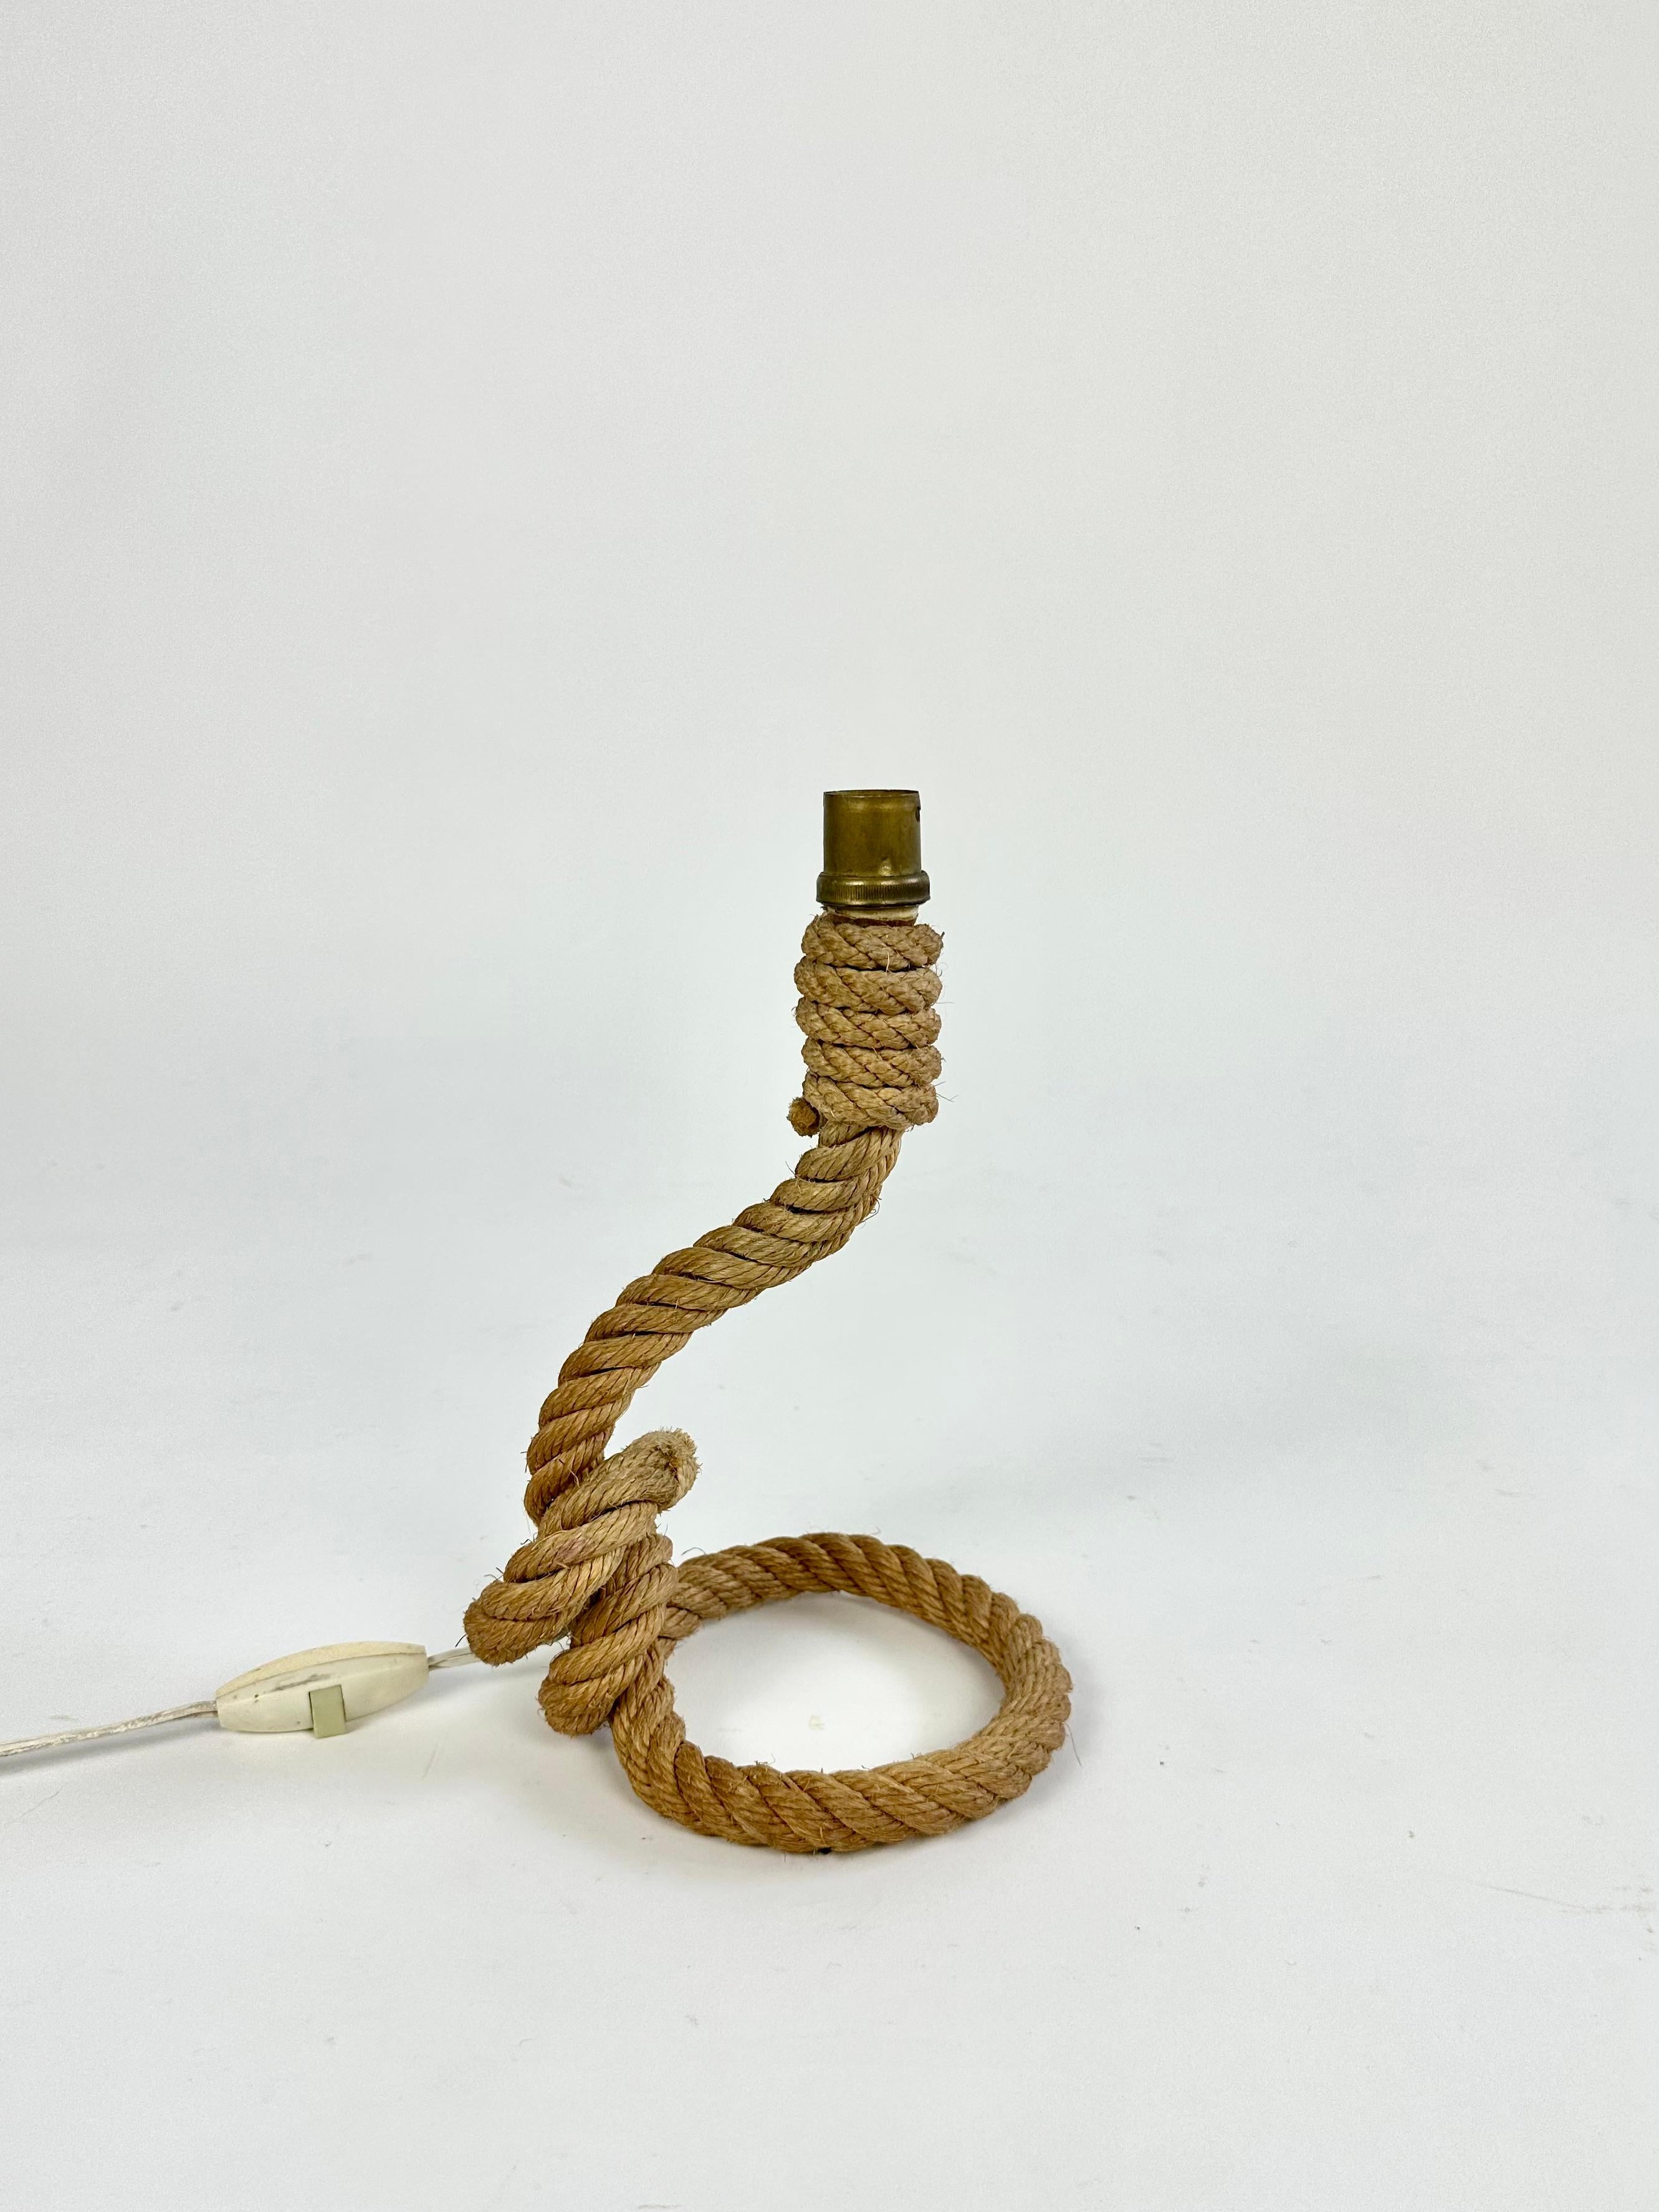 Vintage rope table lamp by Audoux & Minet, France c.1950

In original as found condition, sourced from rural France. A good, clean example in working order

Lamp base only. 

No damage or fraying to the rope. Original switch and wiring (short wire,